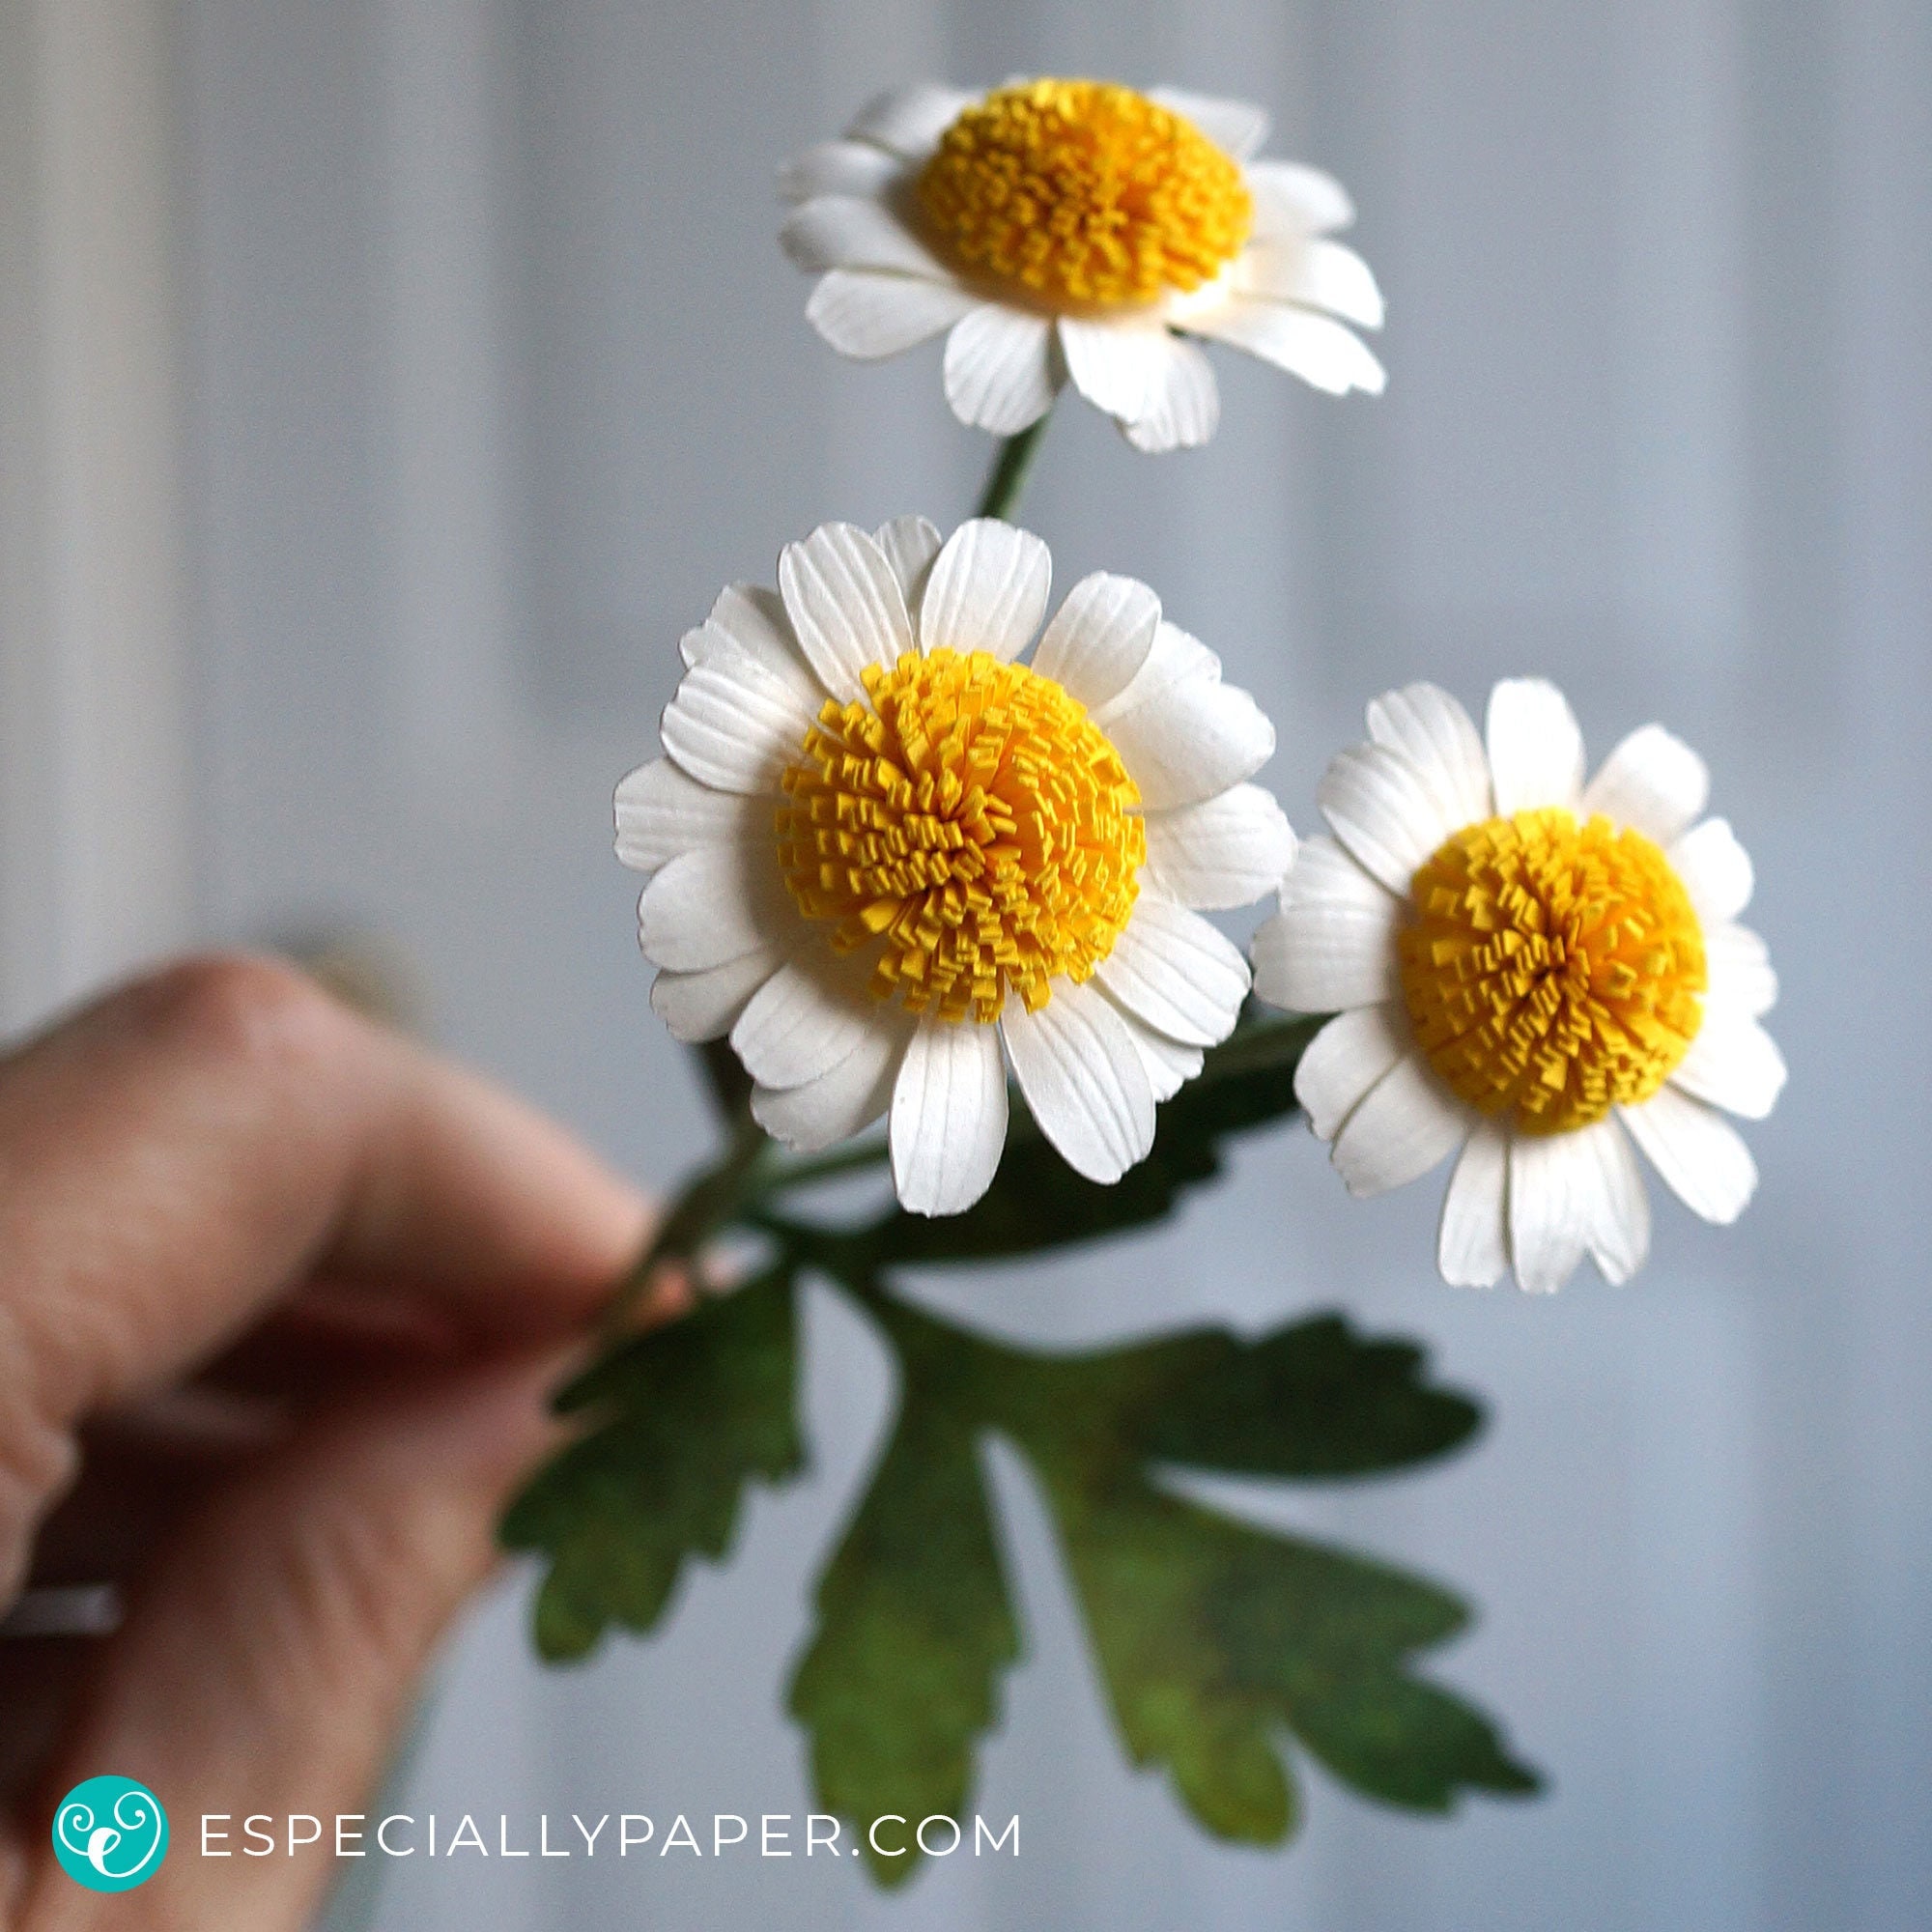 Download 3d Paper Flower Template For Feverfew And Tutorial For Cricut Etsy